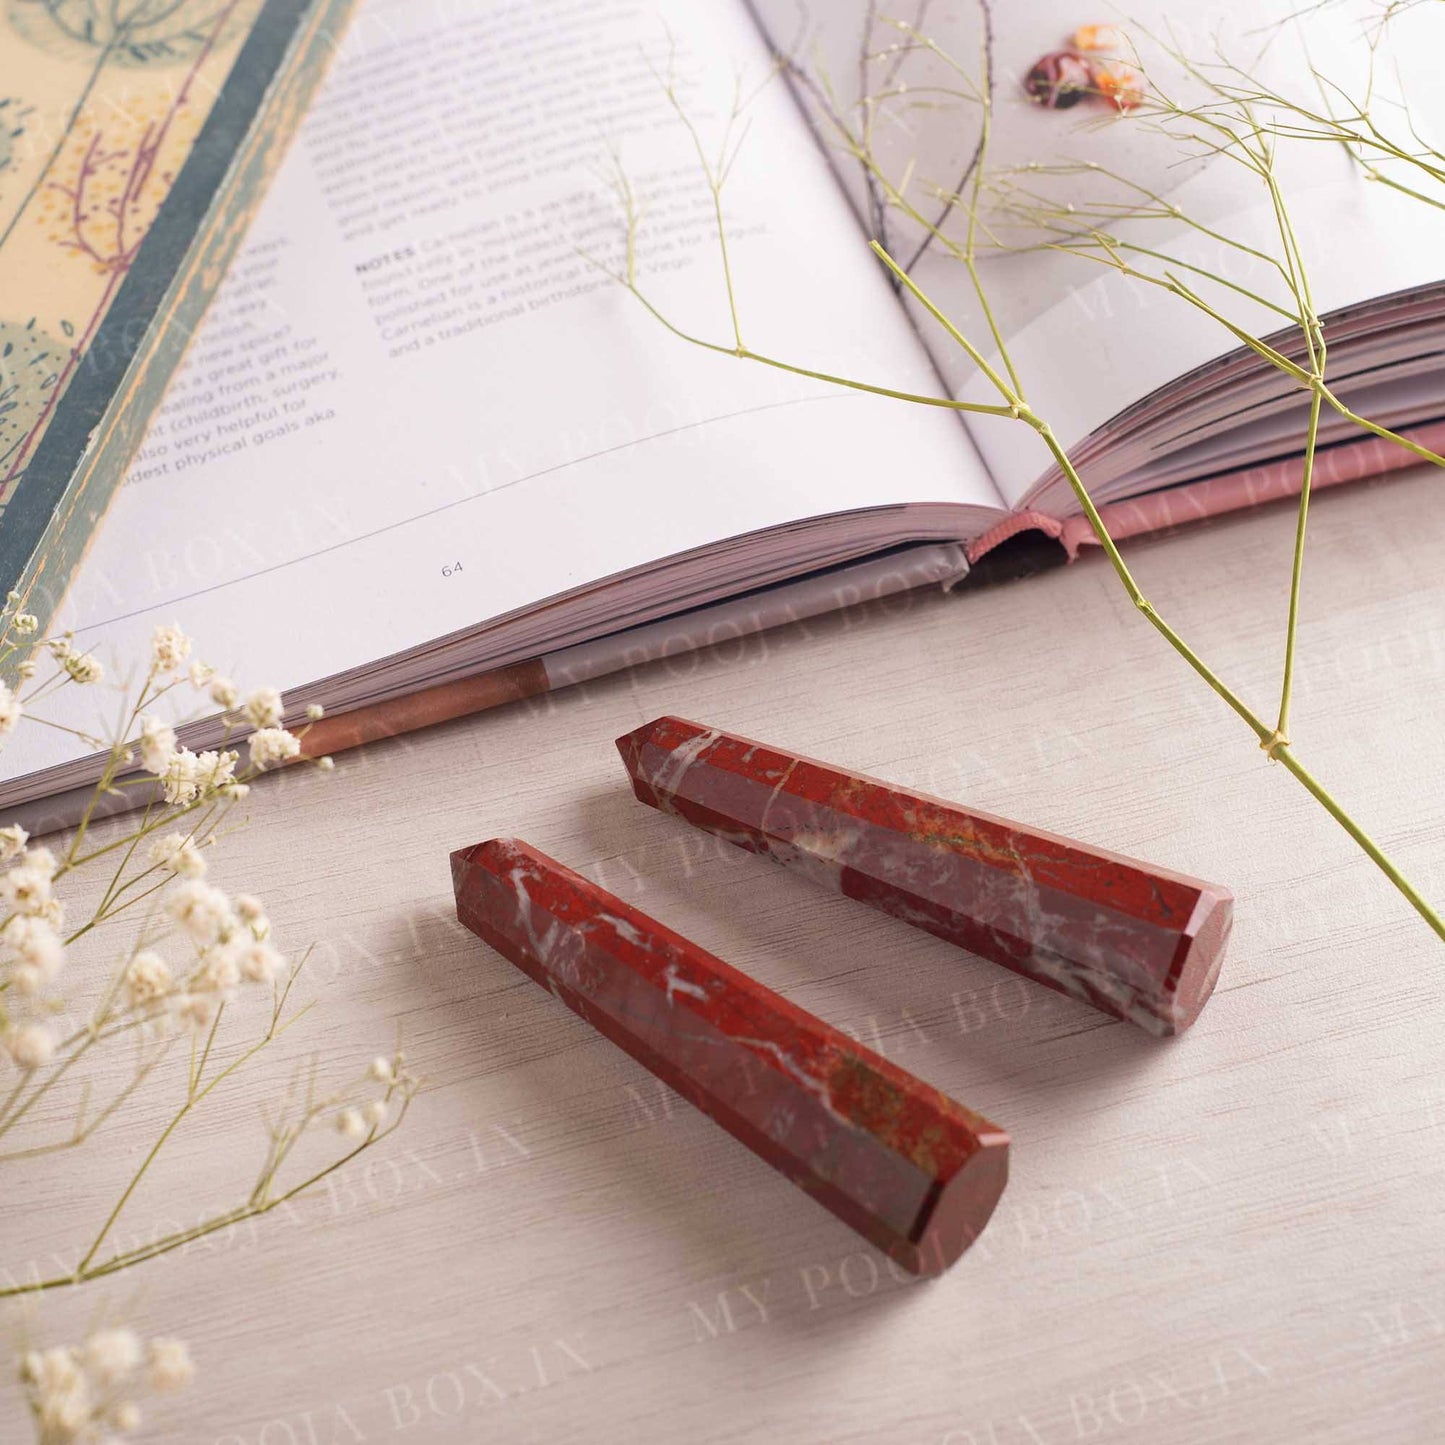 Red Jasper Crystal Healing Tower/Pencil (Set of 2)⎮Stability & Power